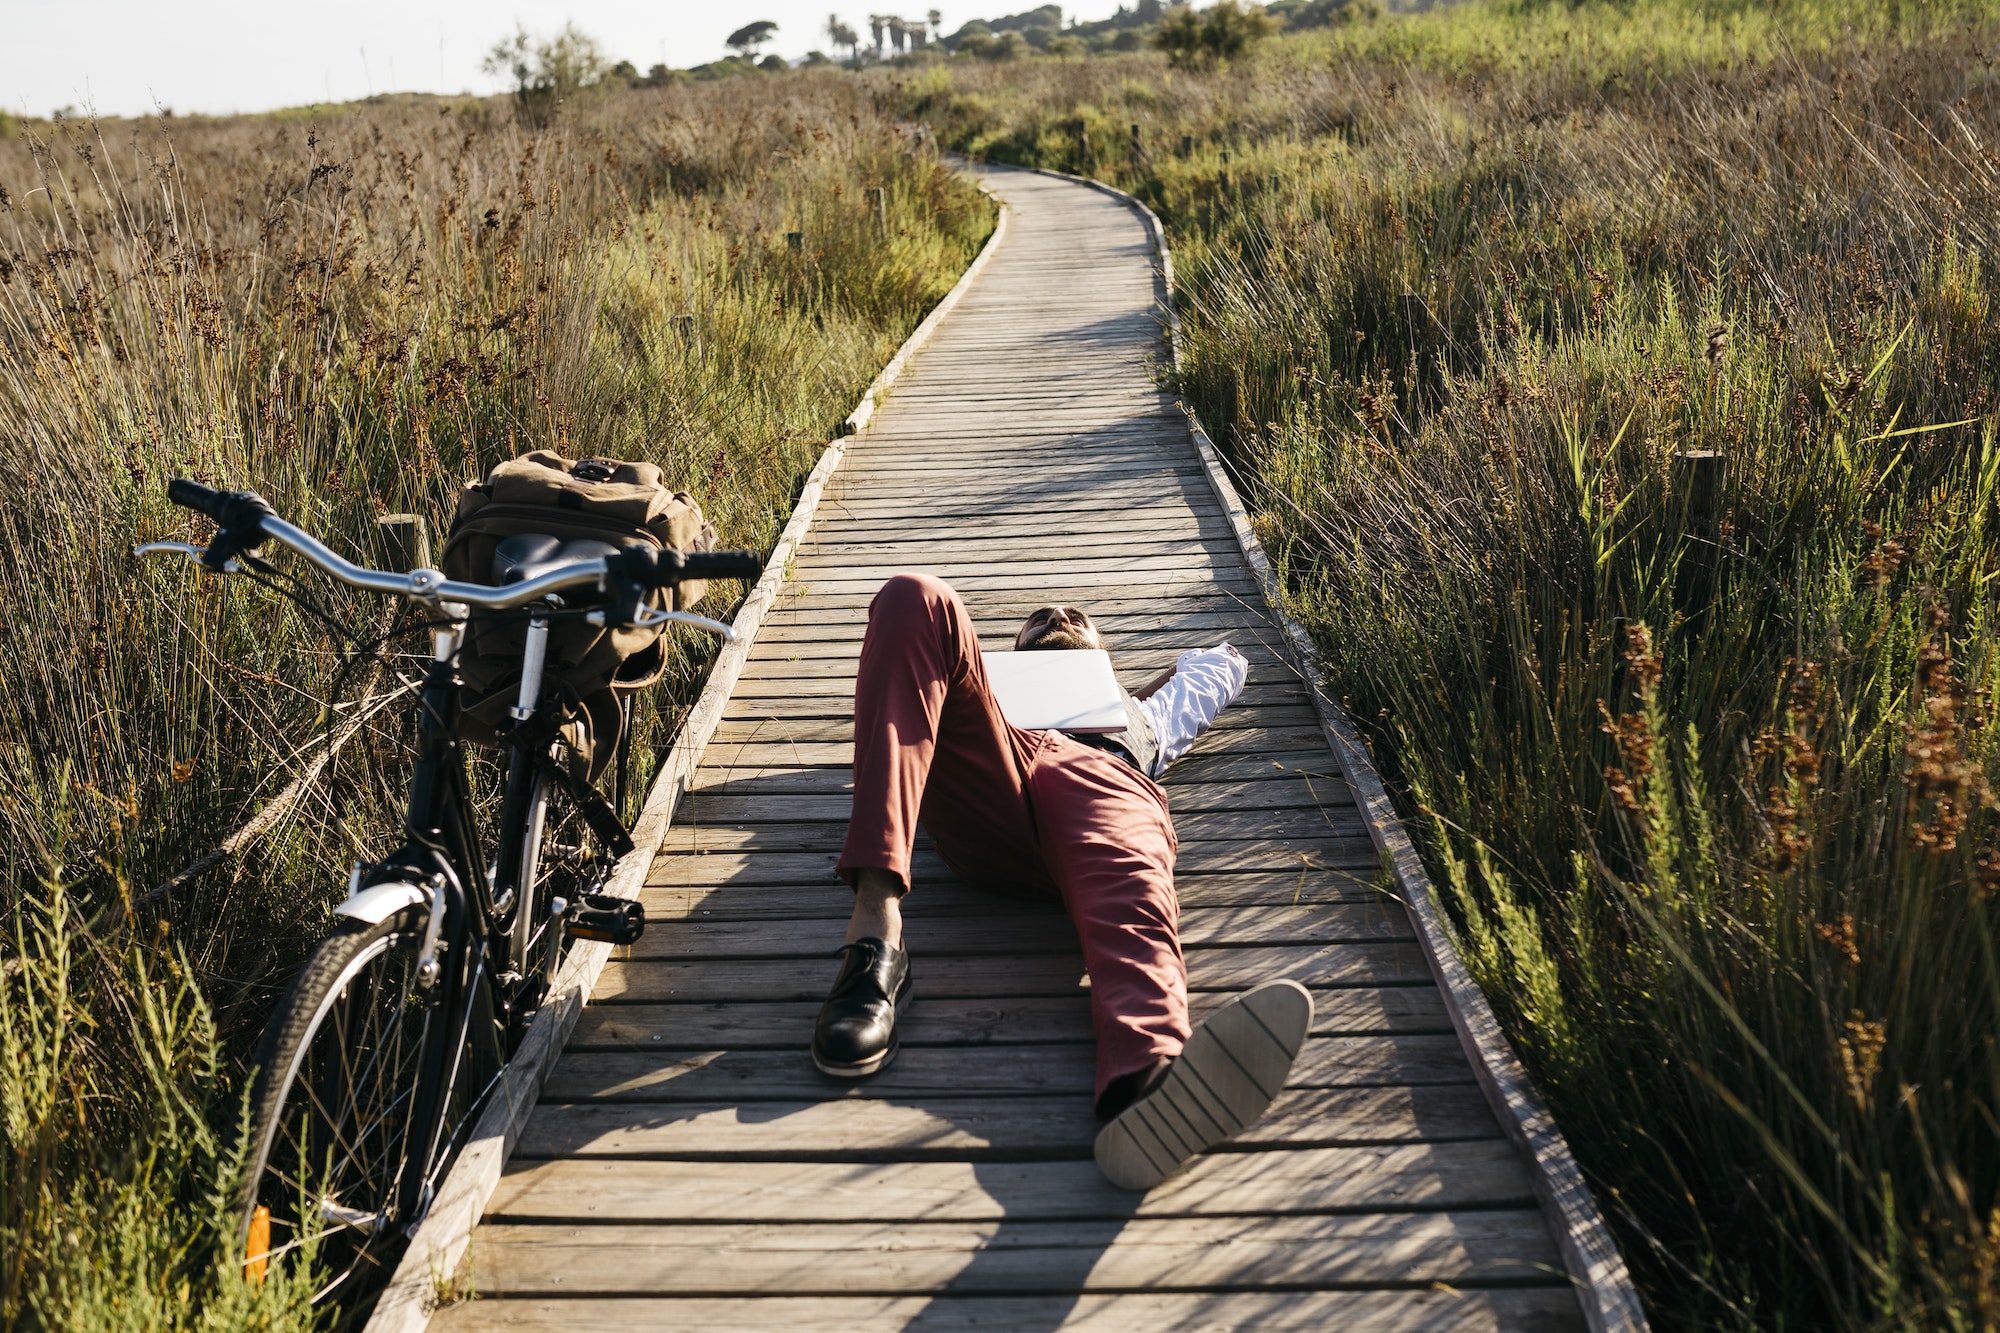 Well dressed man with laptop lying on a wooden walkway in the countryside next to a bike